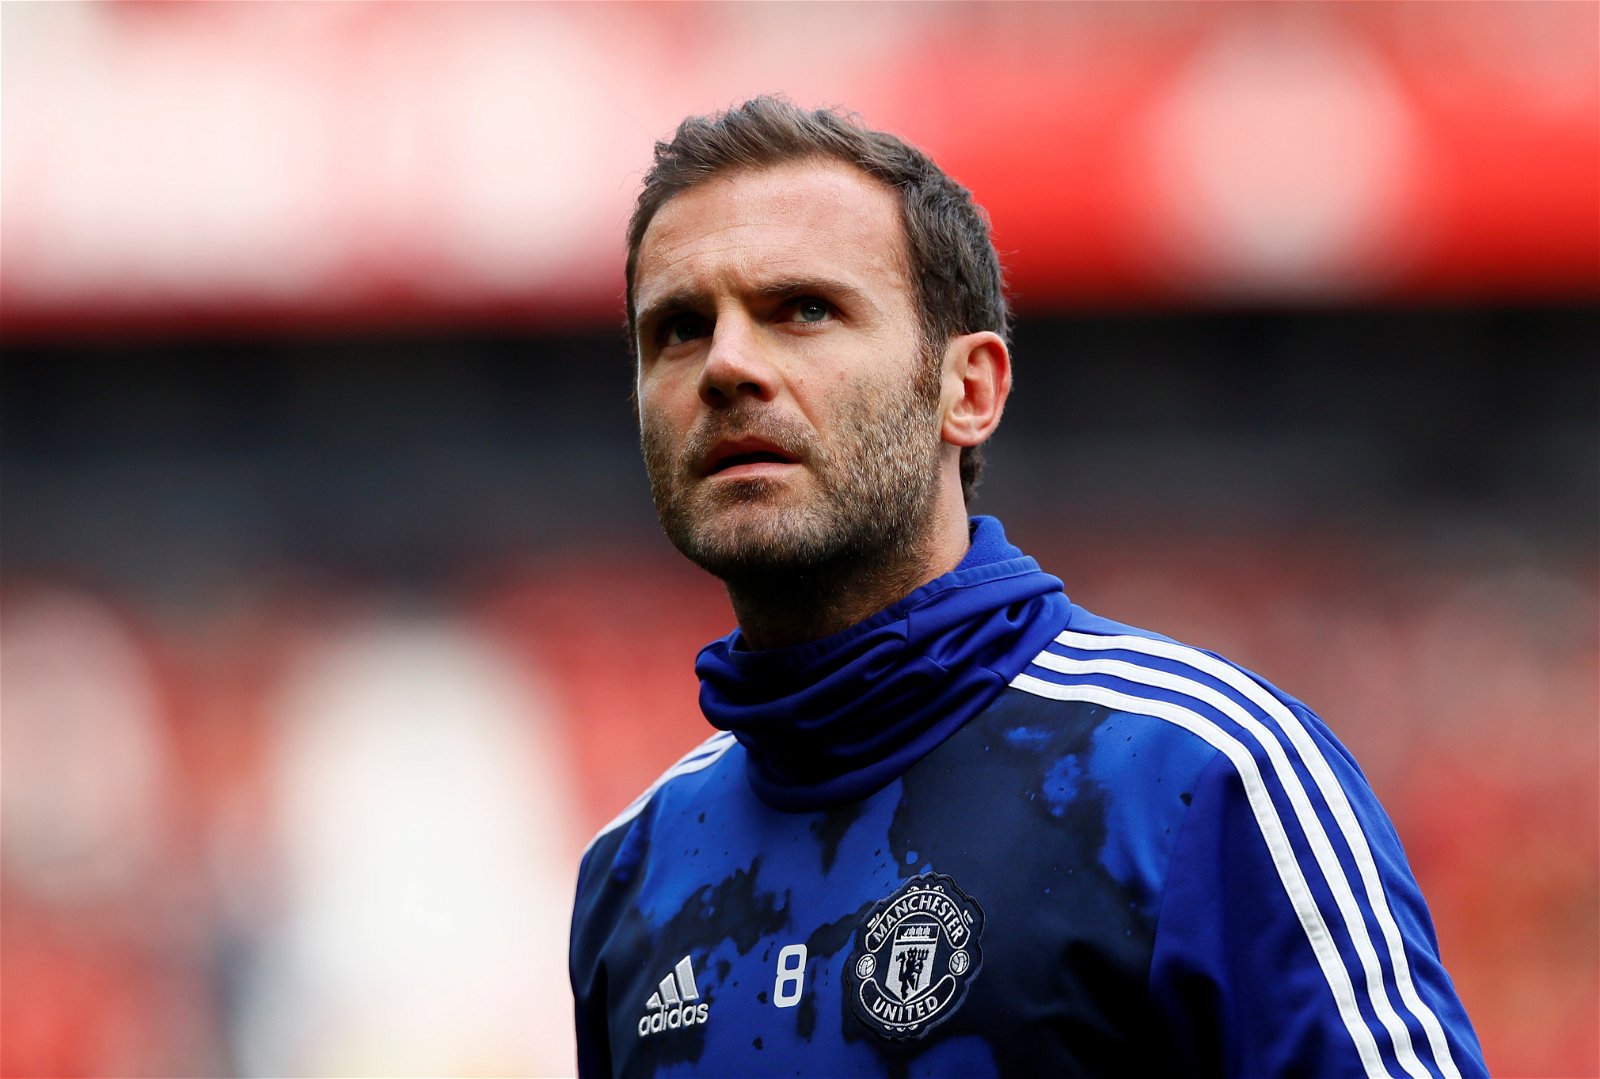 Mata on meeting Moyes and his departure